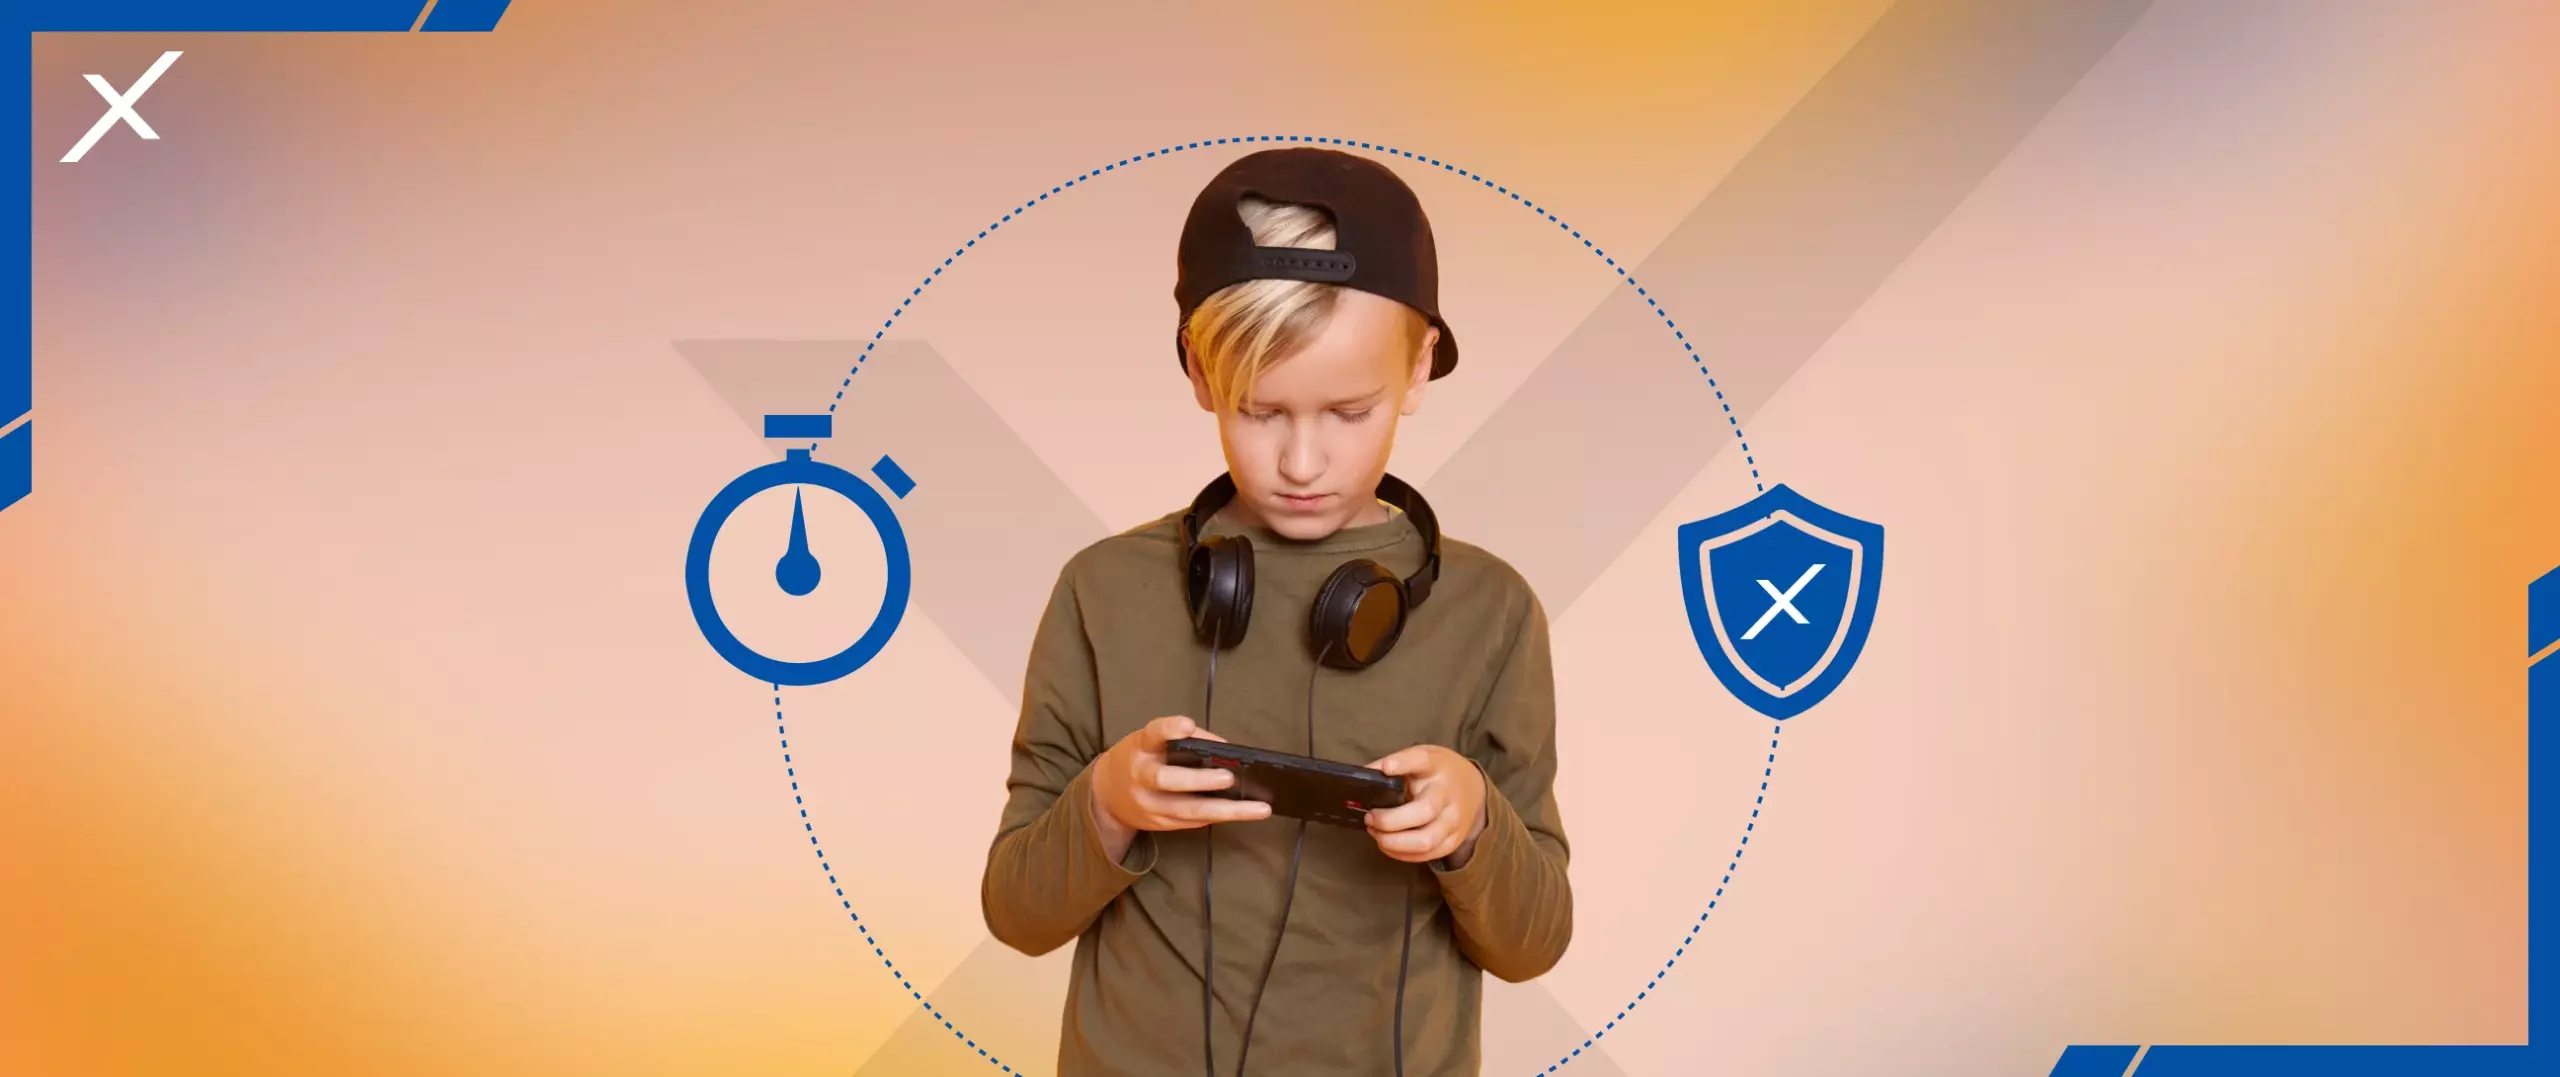  Finding The Right Balance Between Gaming And Kids with Spy Apps